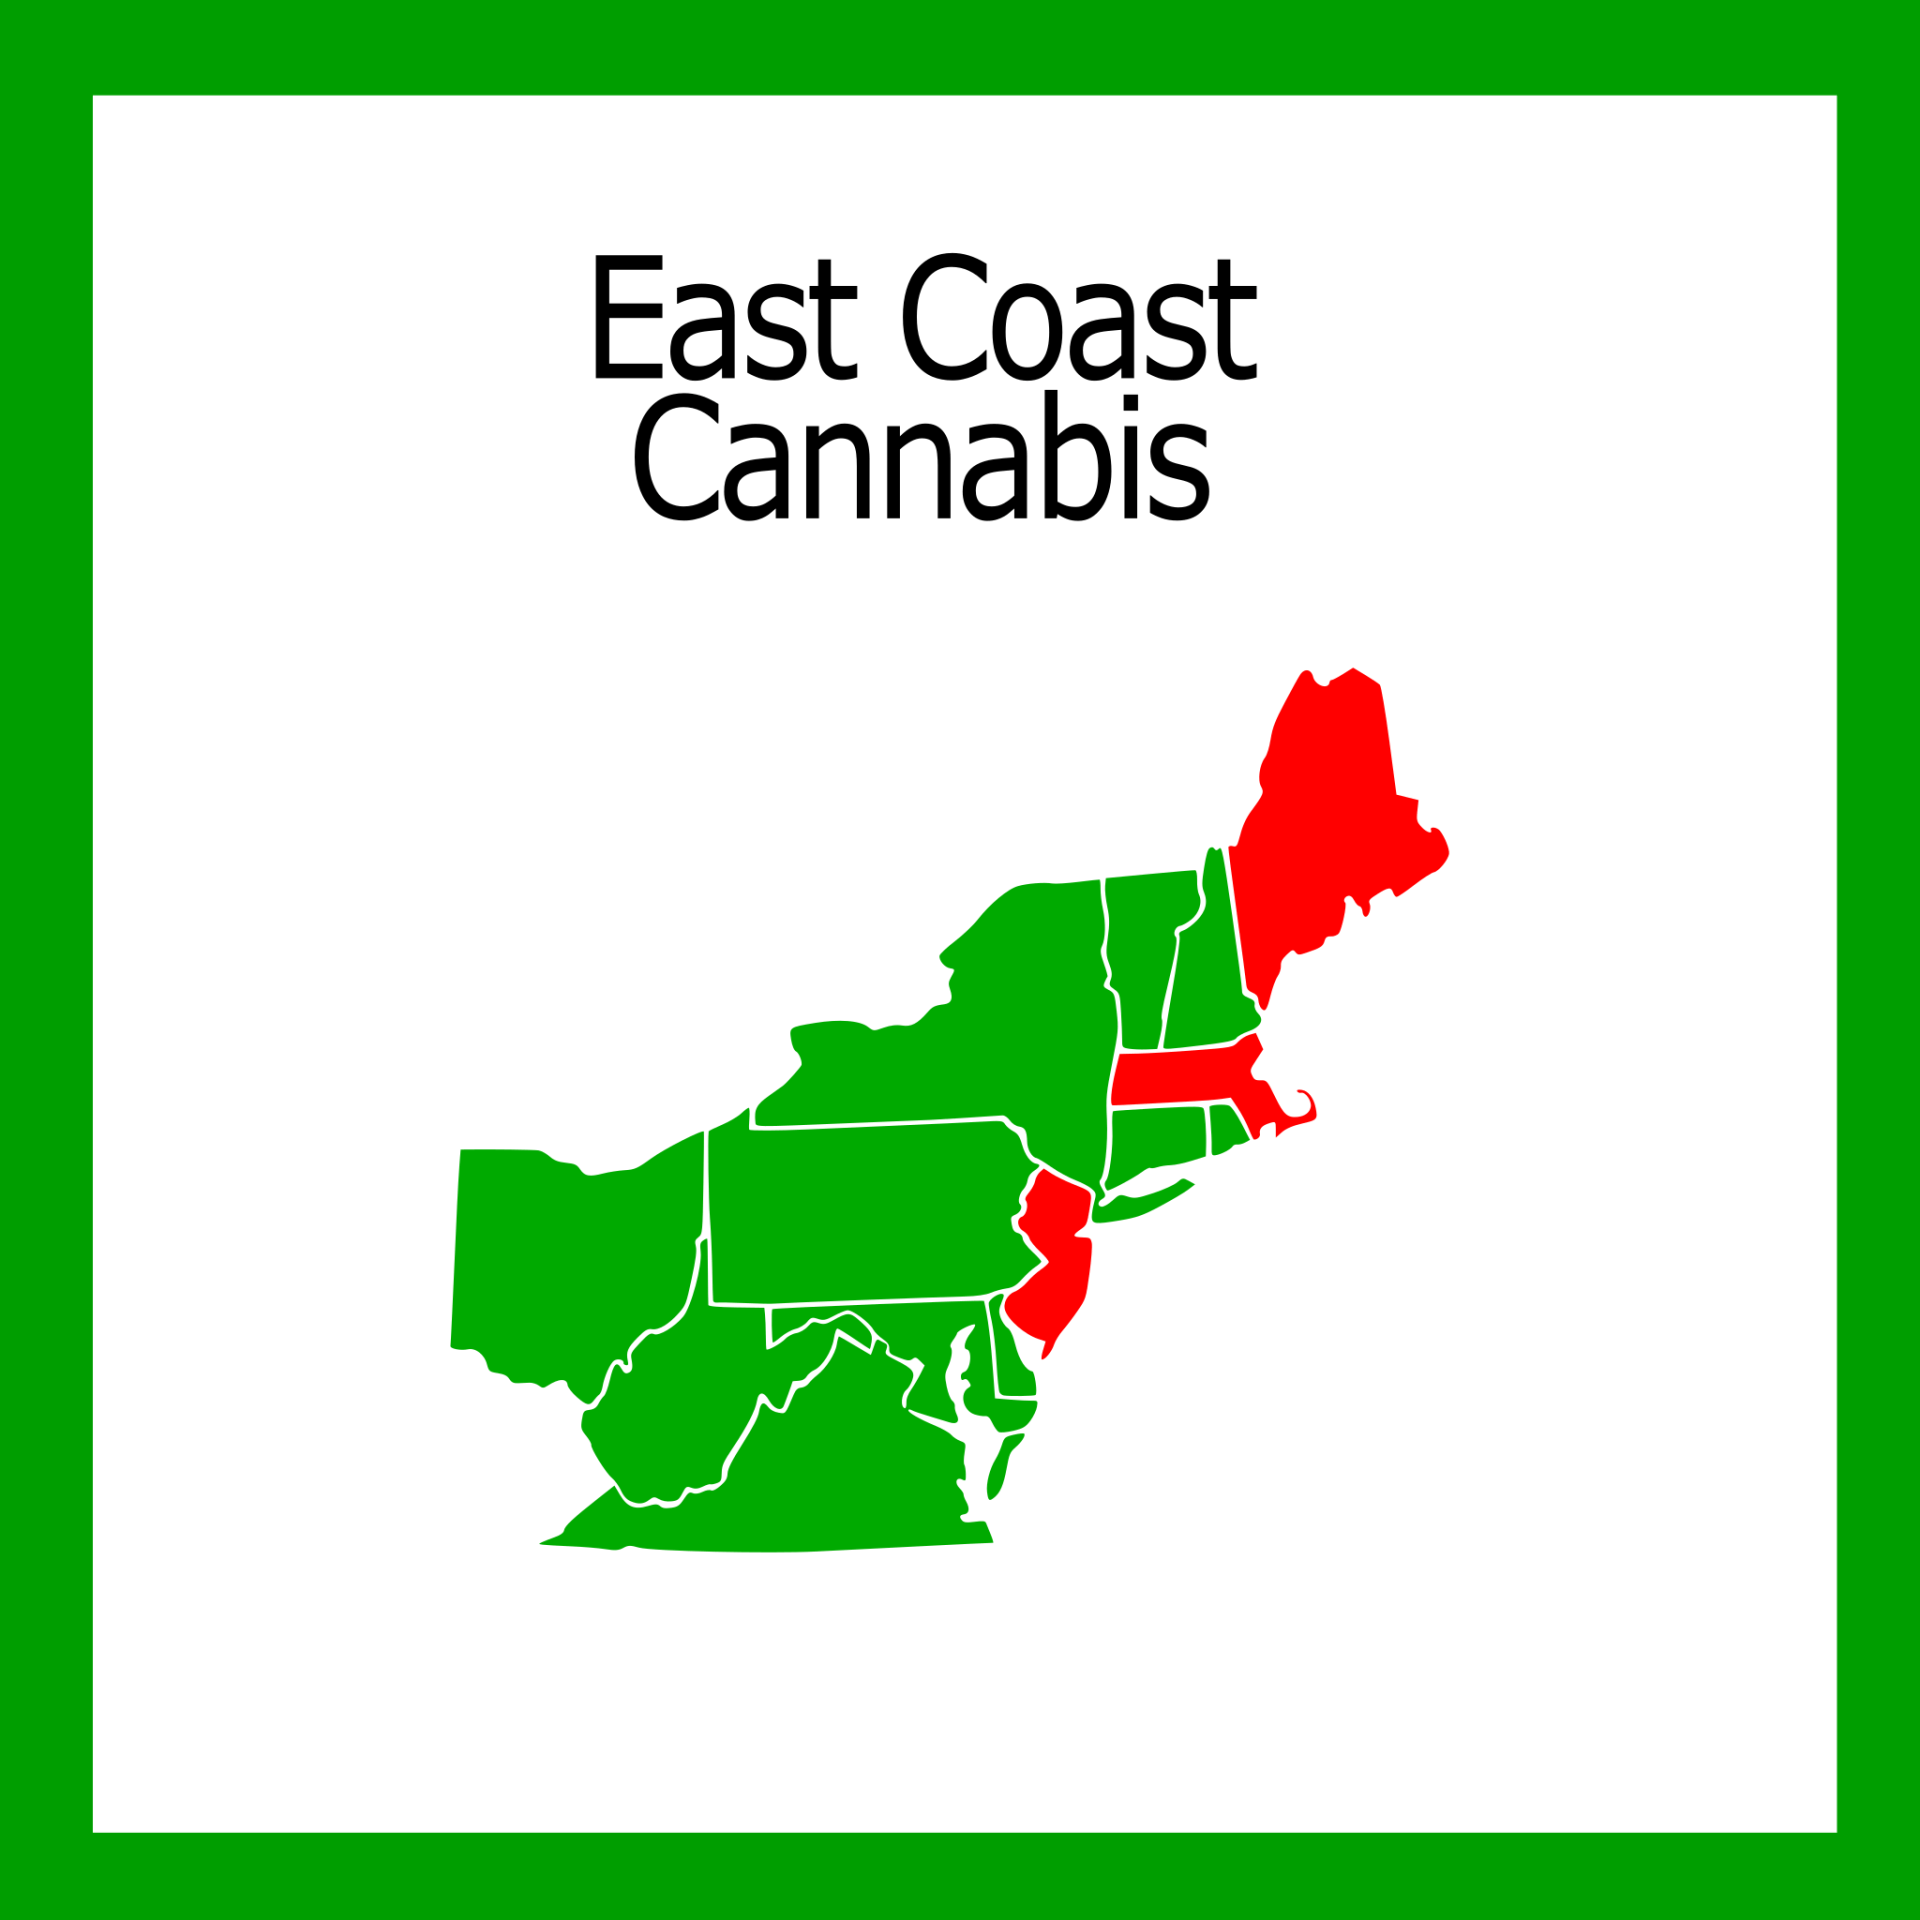 New jersey cannabis consultant